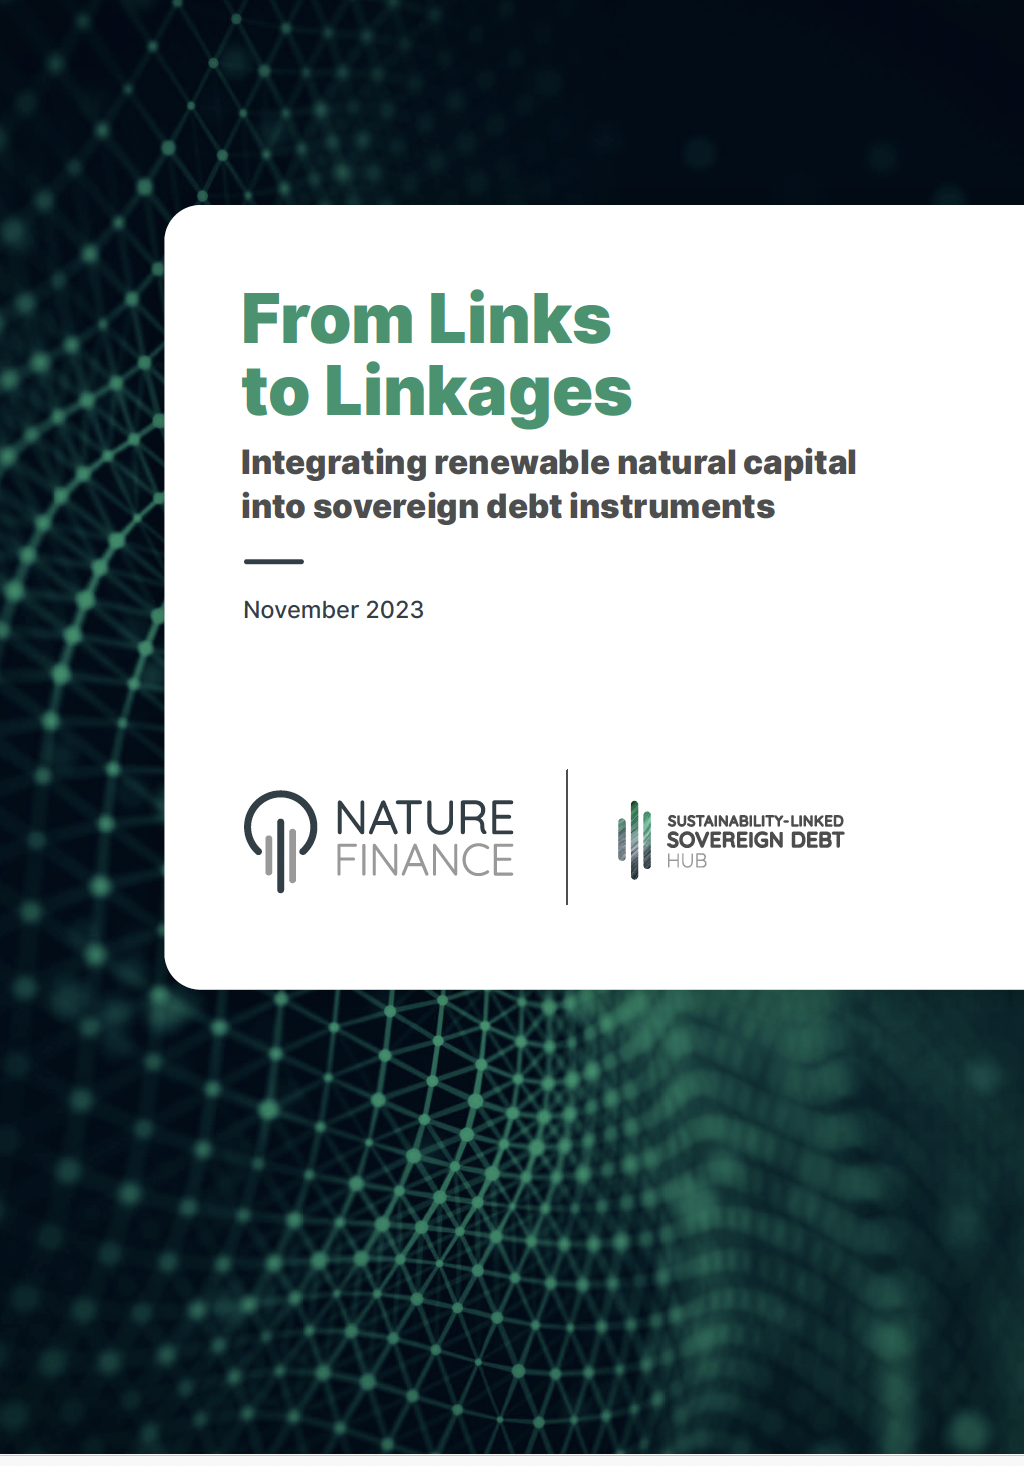 From Links to Linkages: Integrating Renewable Natural Capital into Sovereign Debt Instruments